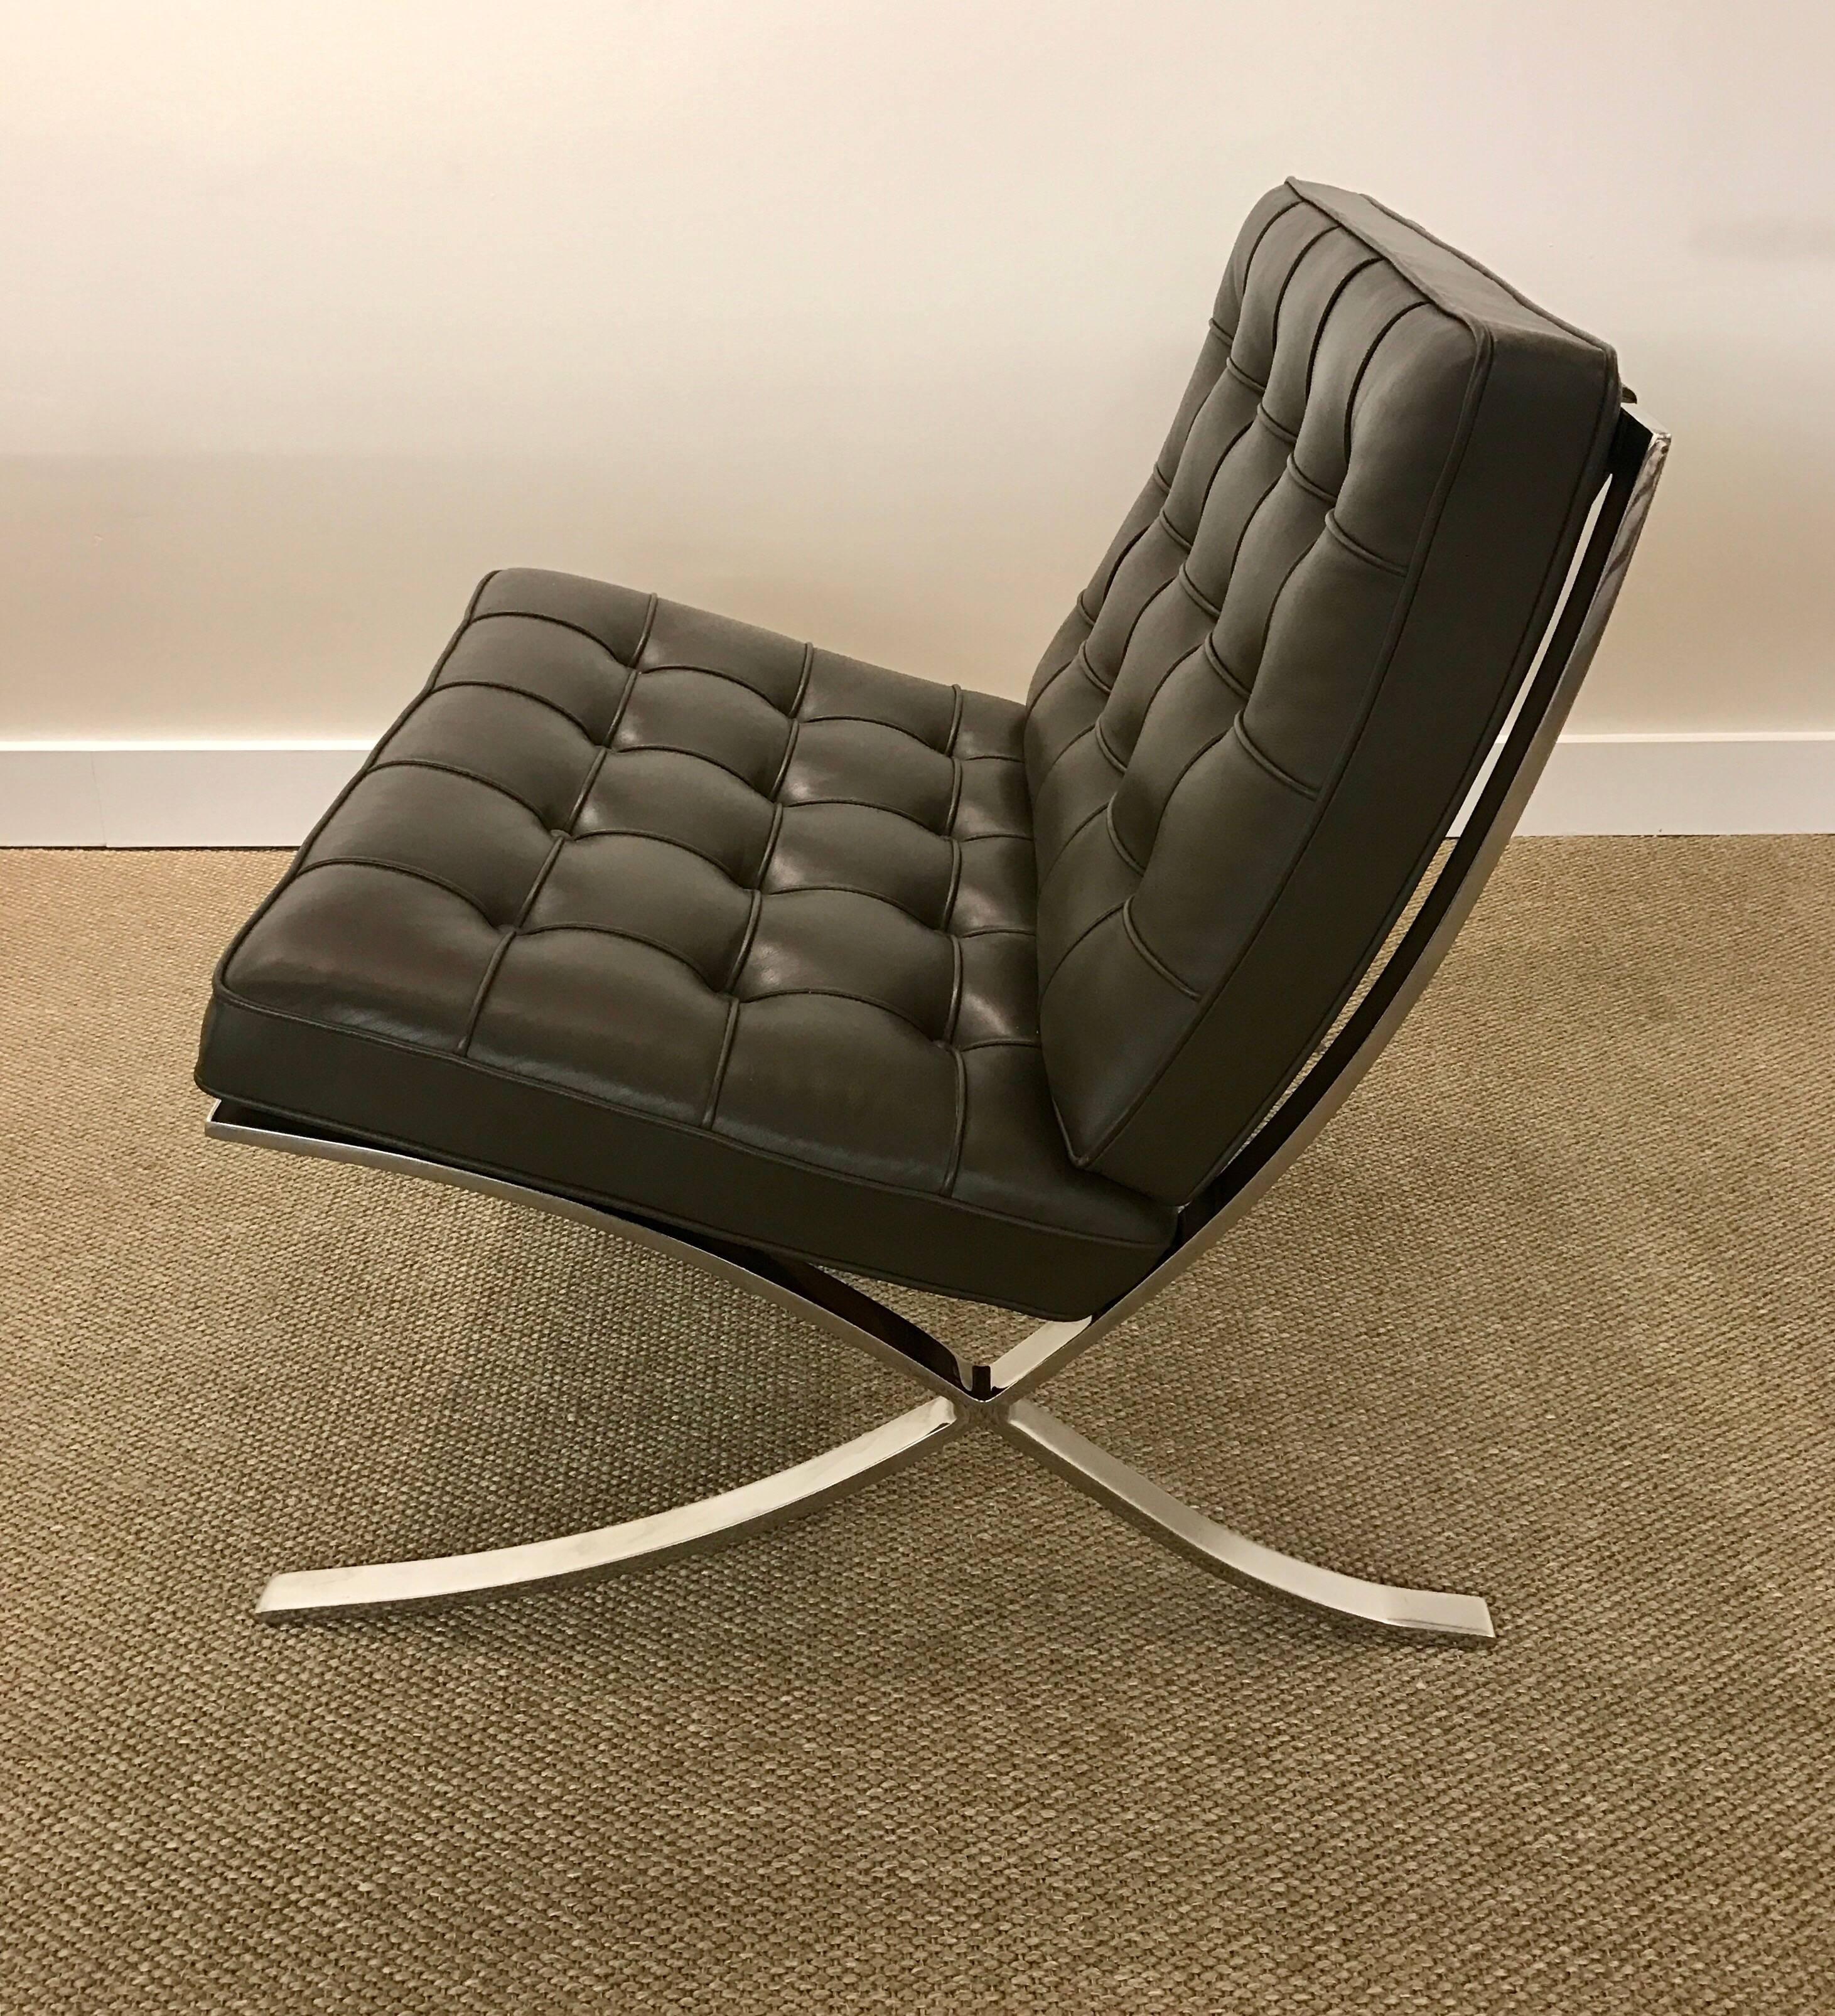 Stainless Steel Signed Knoll Barcelona Rare Olive Brown Leather Chair Ludwig Mies van der Rohe